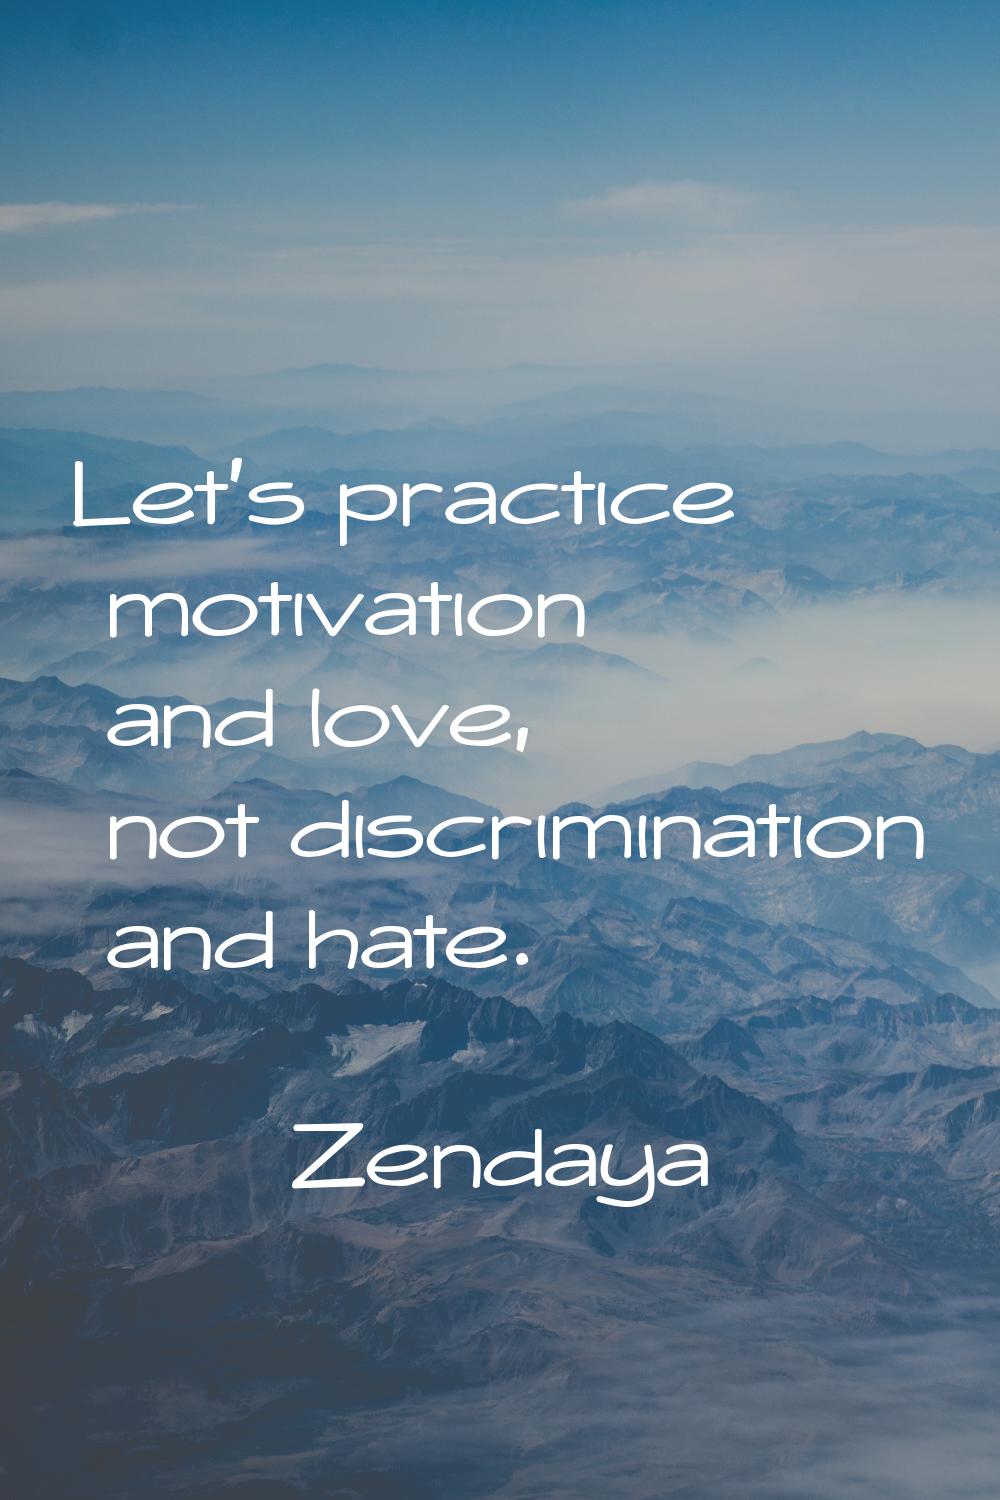 Let's practice motivation and love, not discrimination and hate.